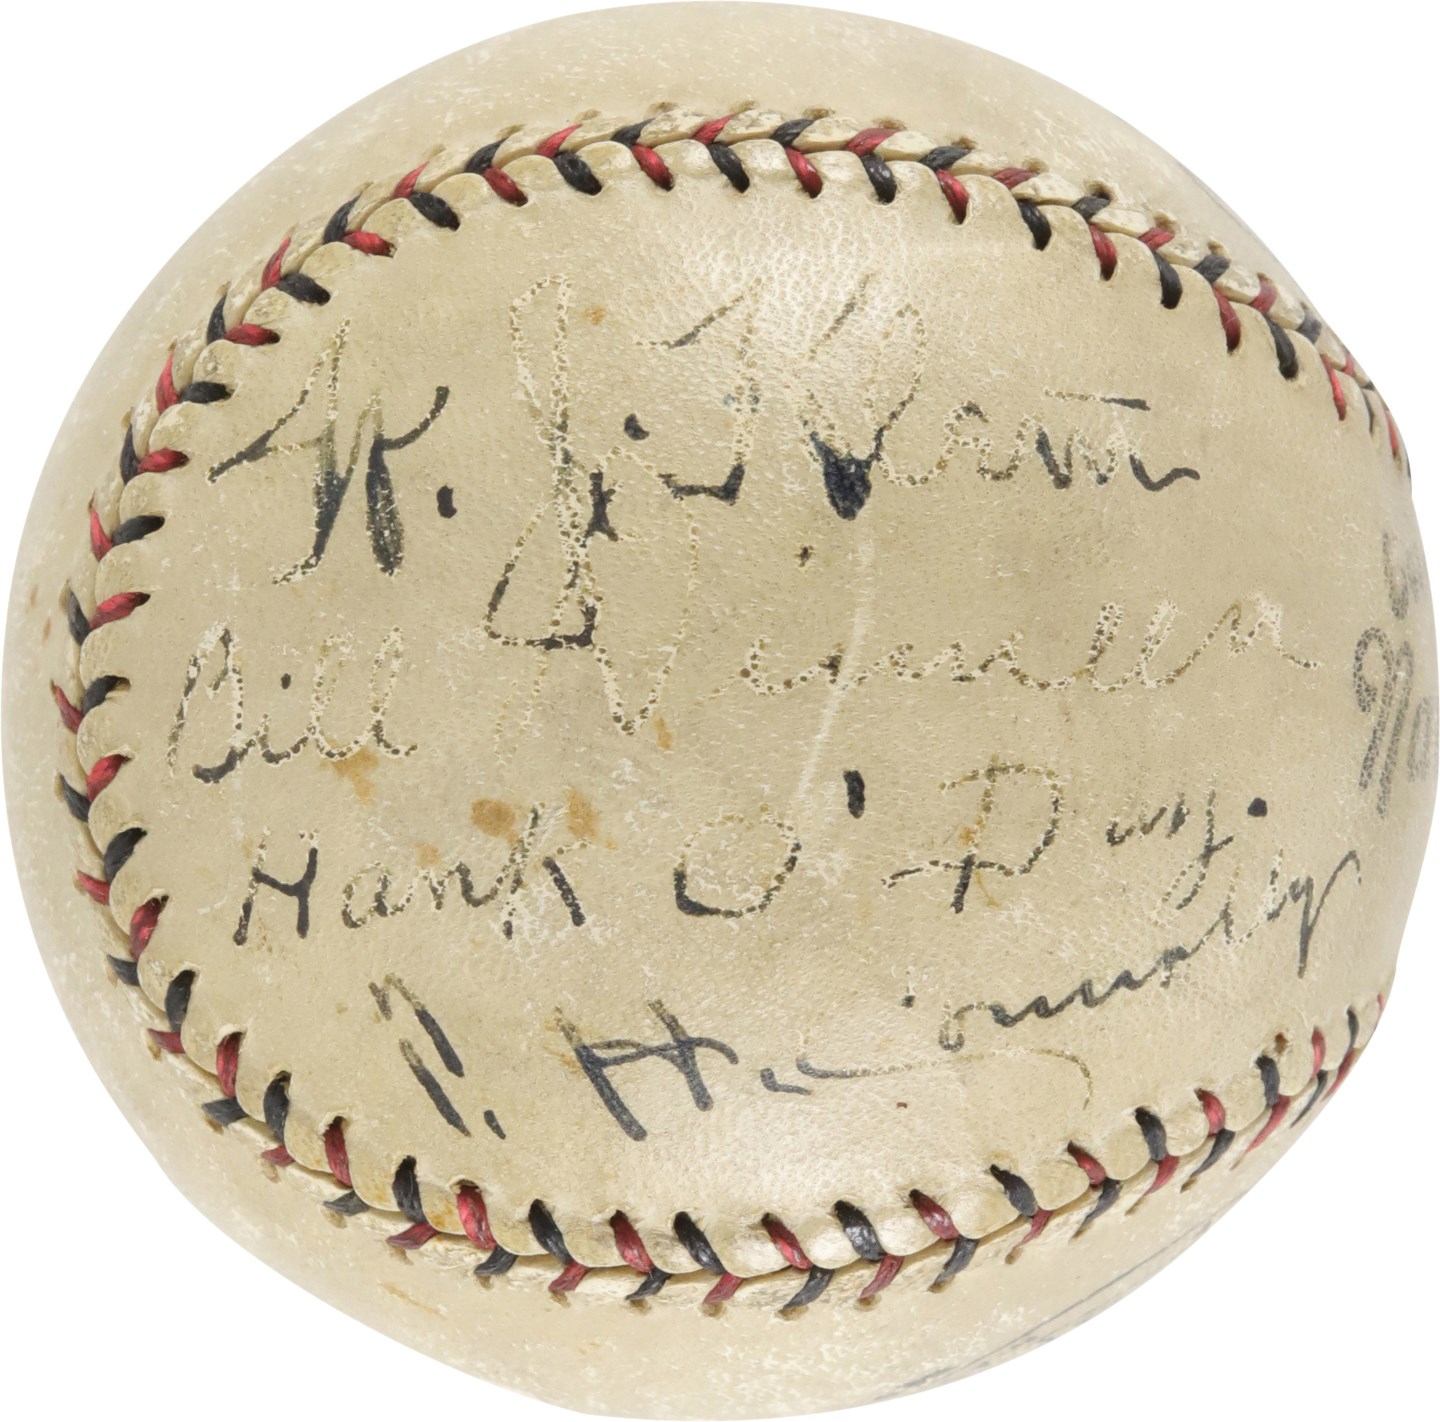 1920 World Series Umpire Crew Signed Baseball with Hank O'Day & Tom Connolly (PSA)